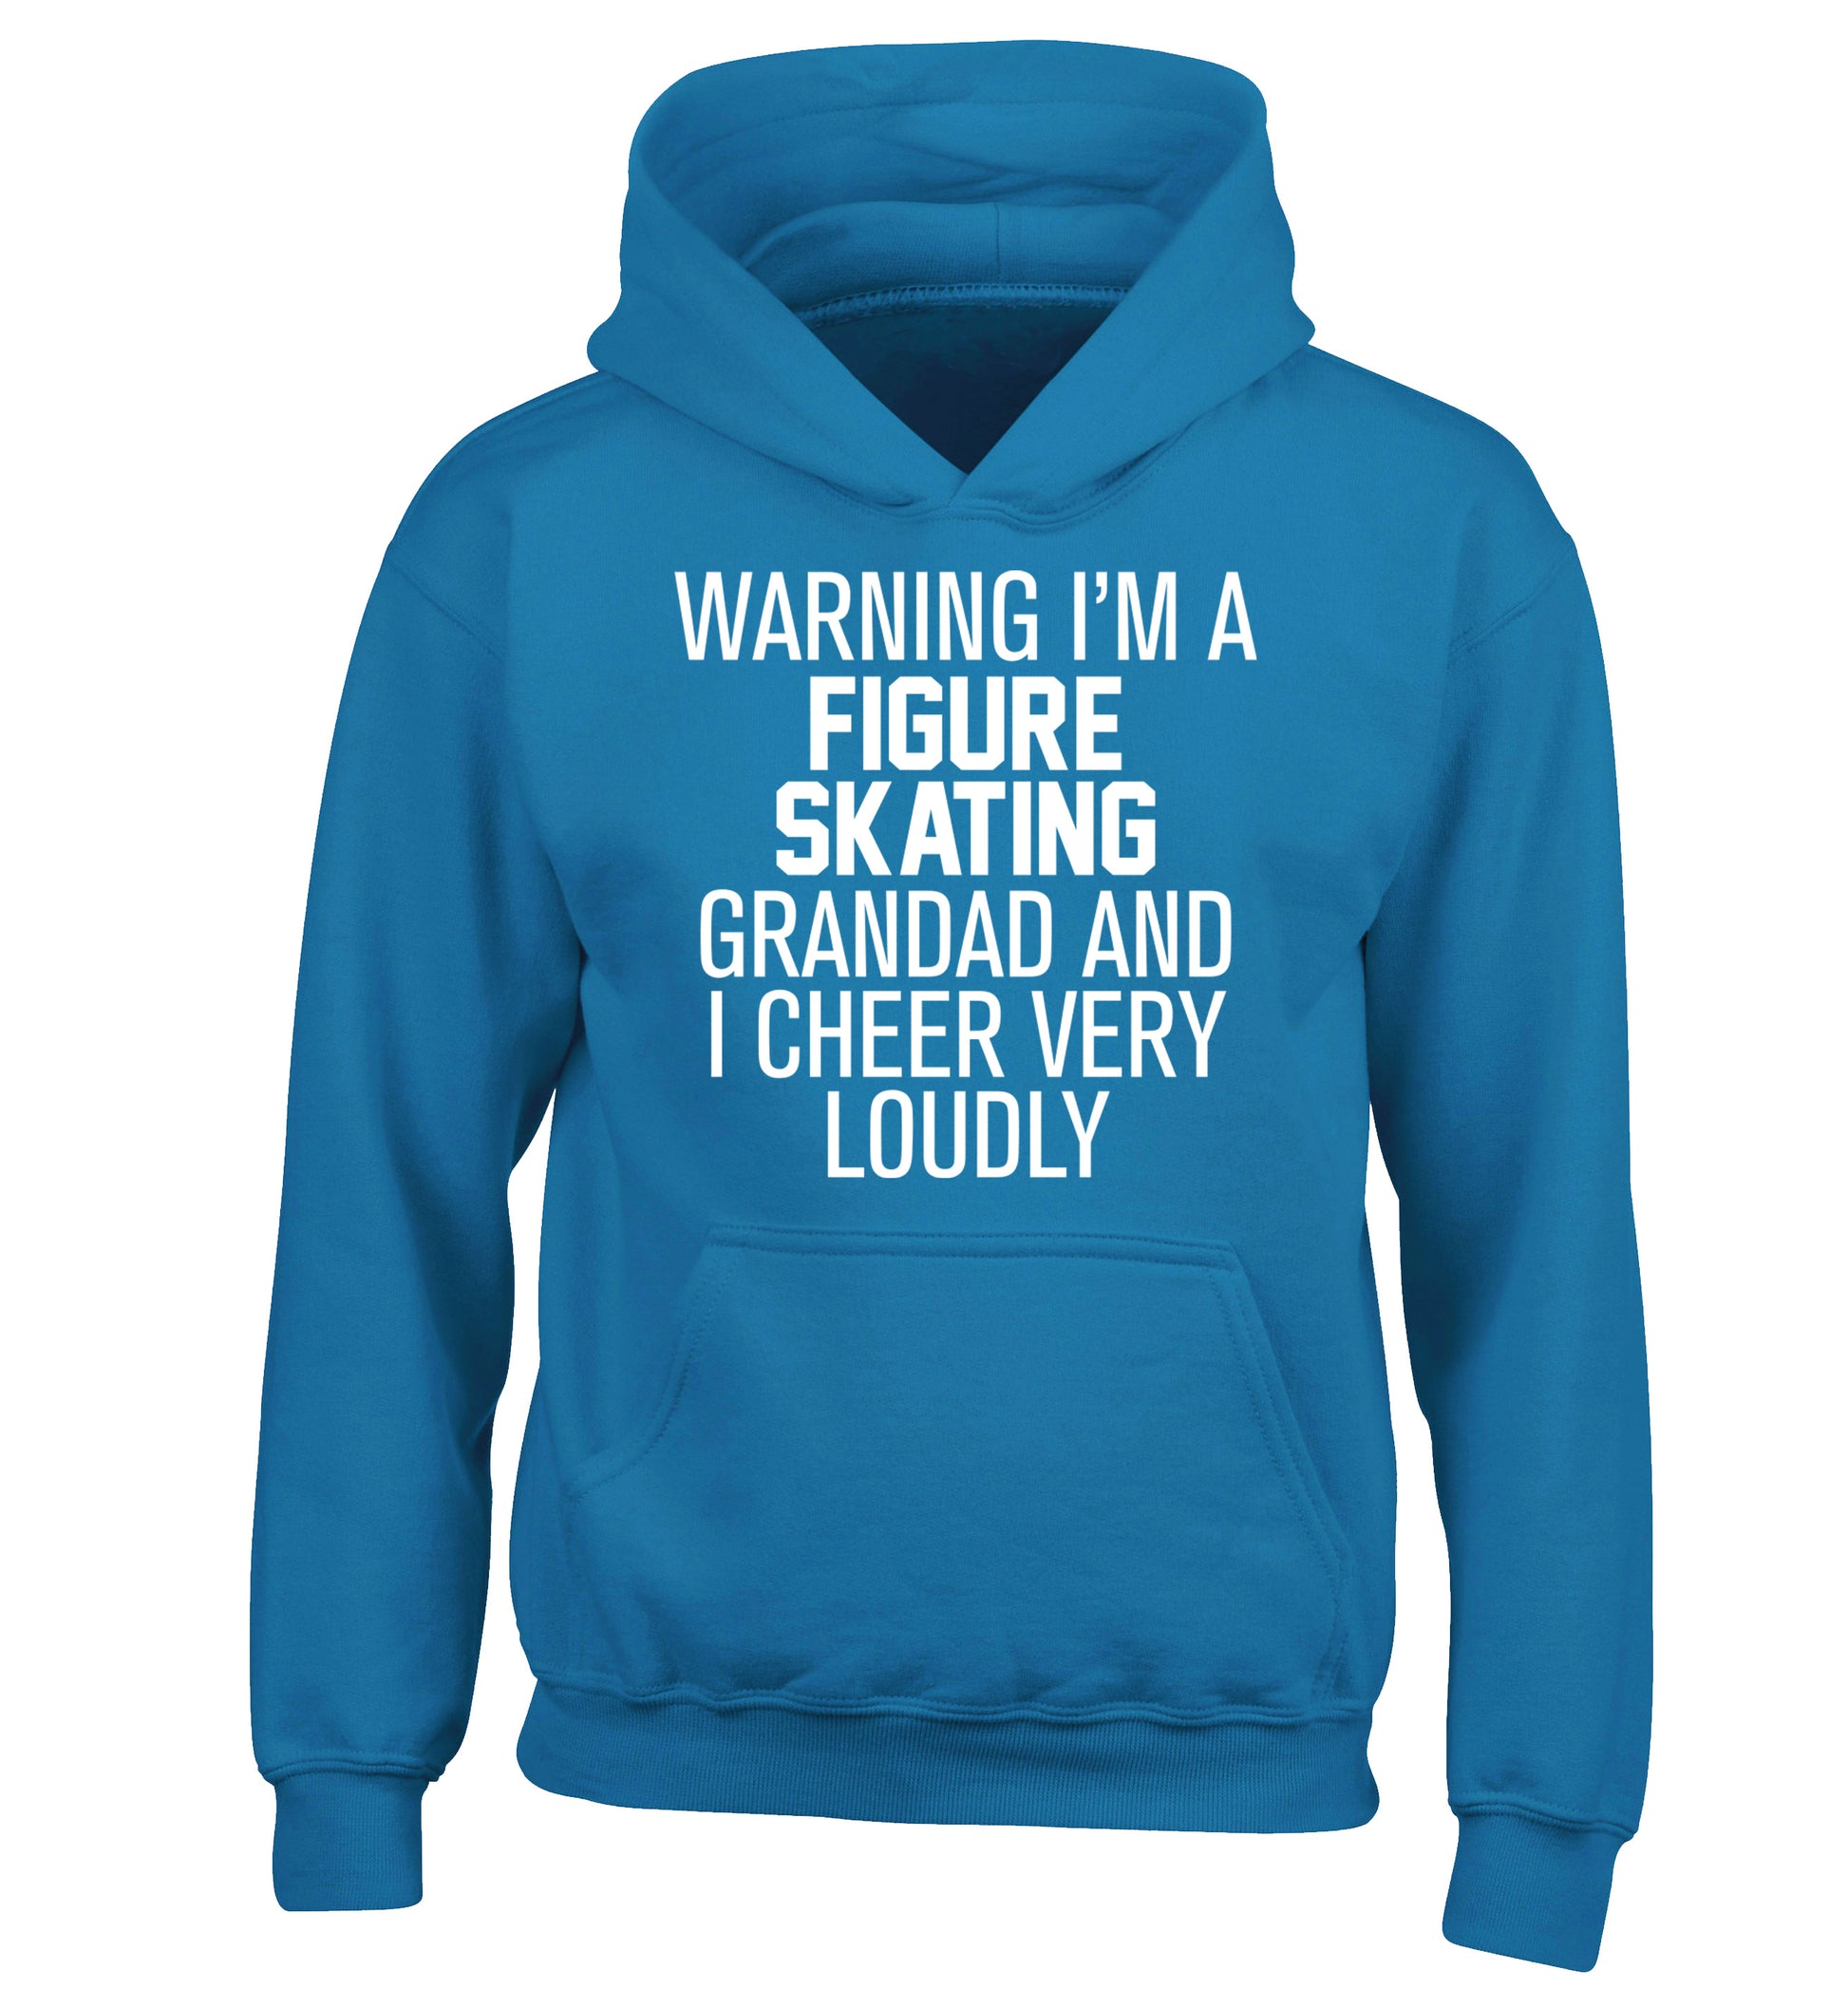 Warning I'm a figure skating grandad and I cheer very loudly children's blue hoodie 12-14 Years